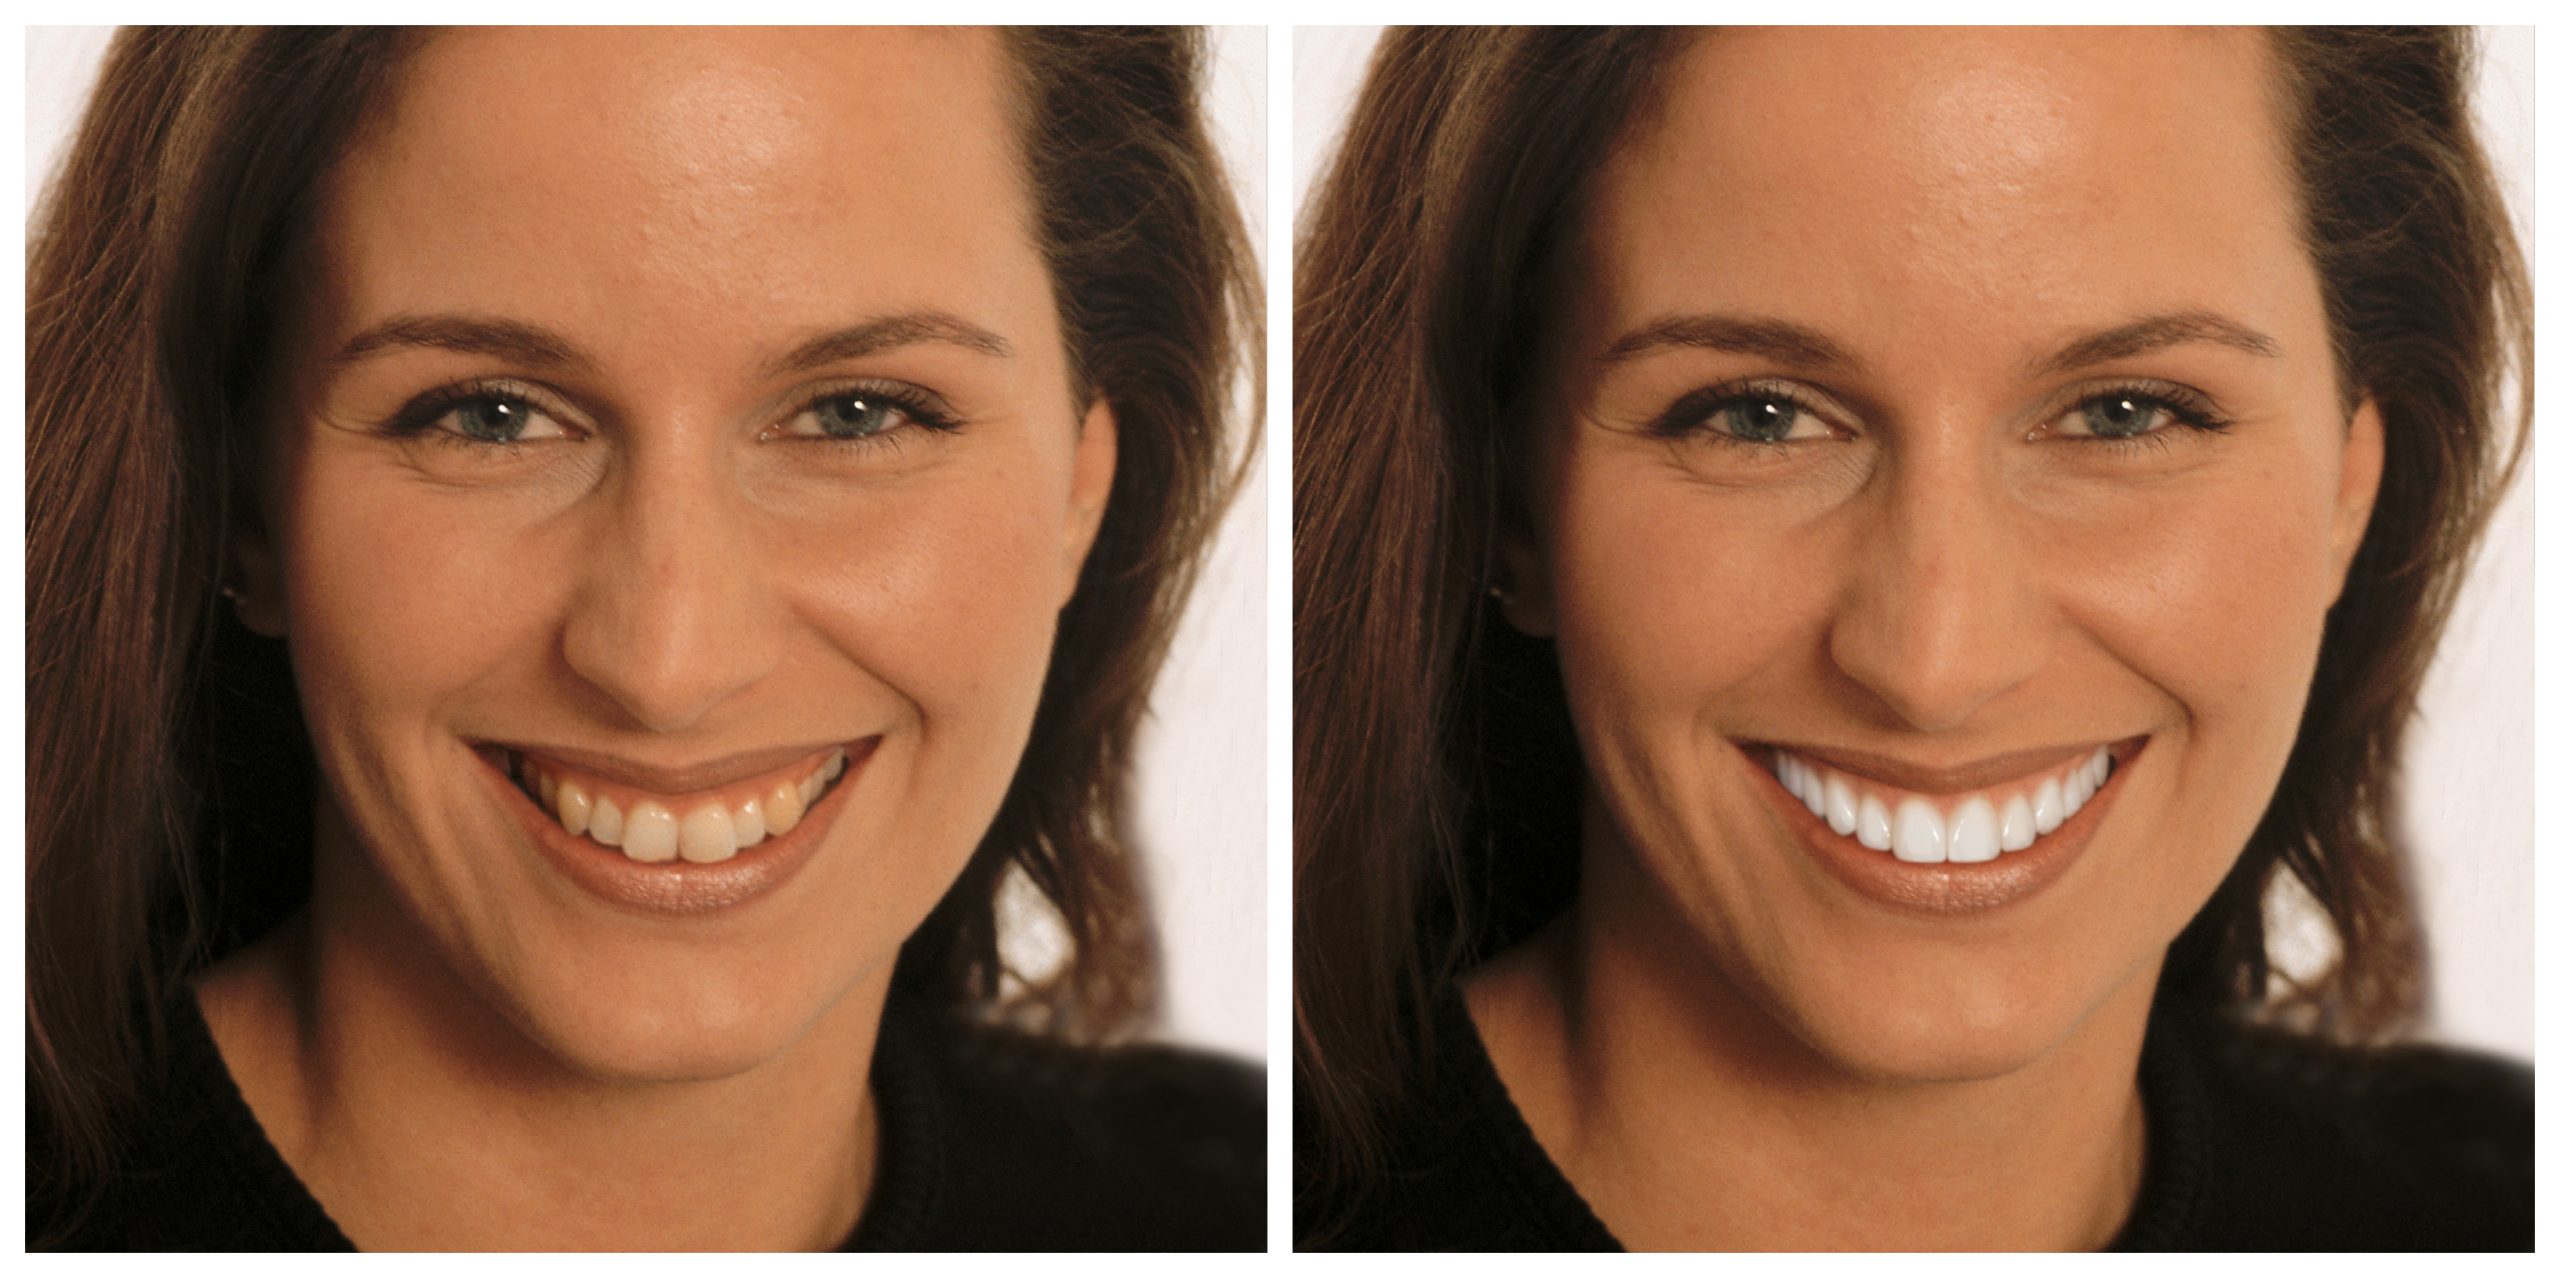 Smile Restoration - Before and After8